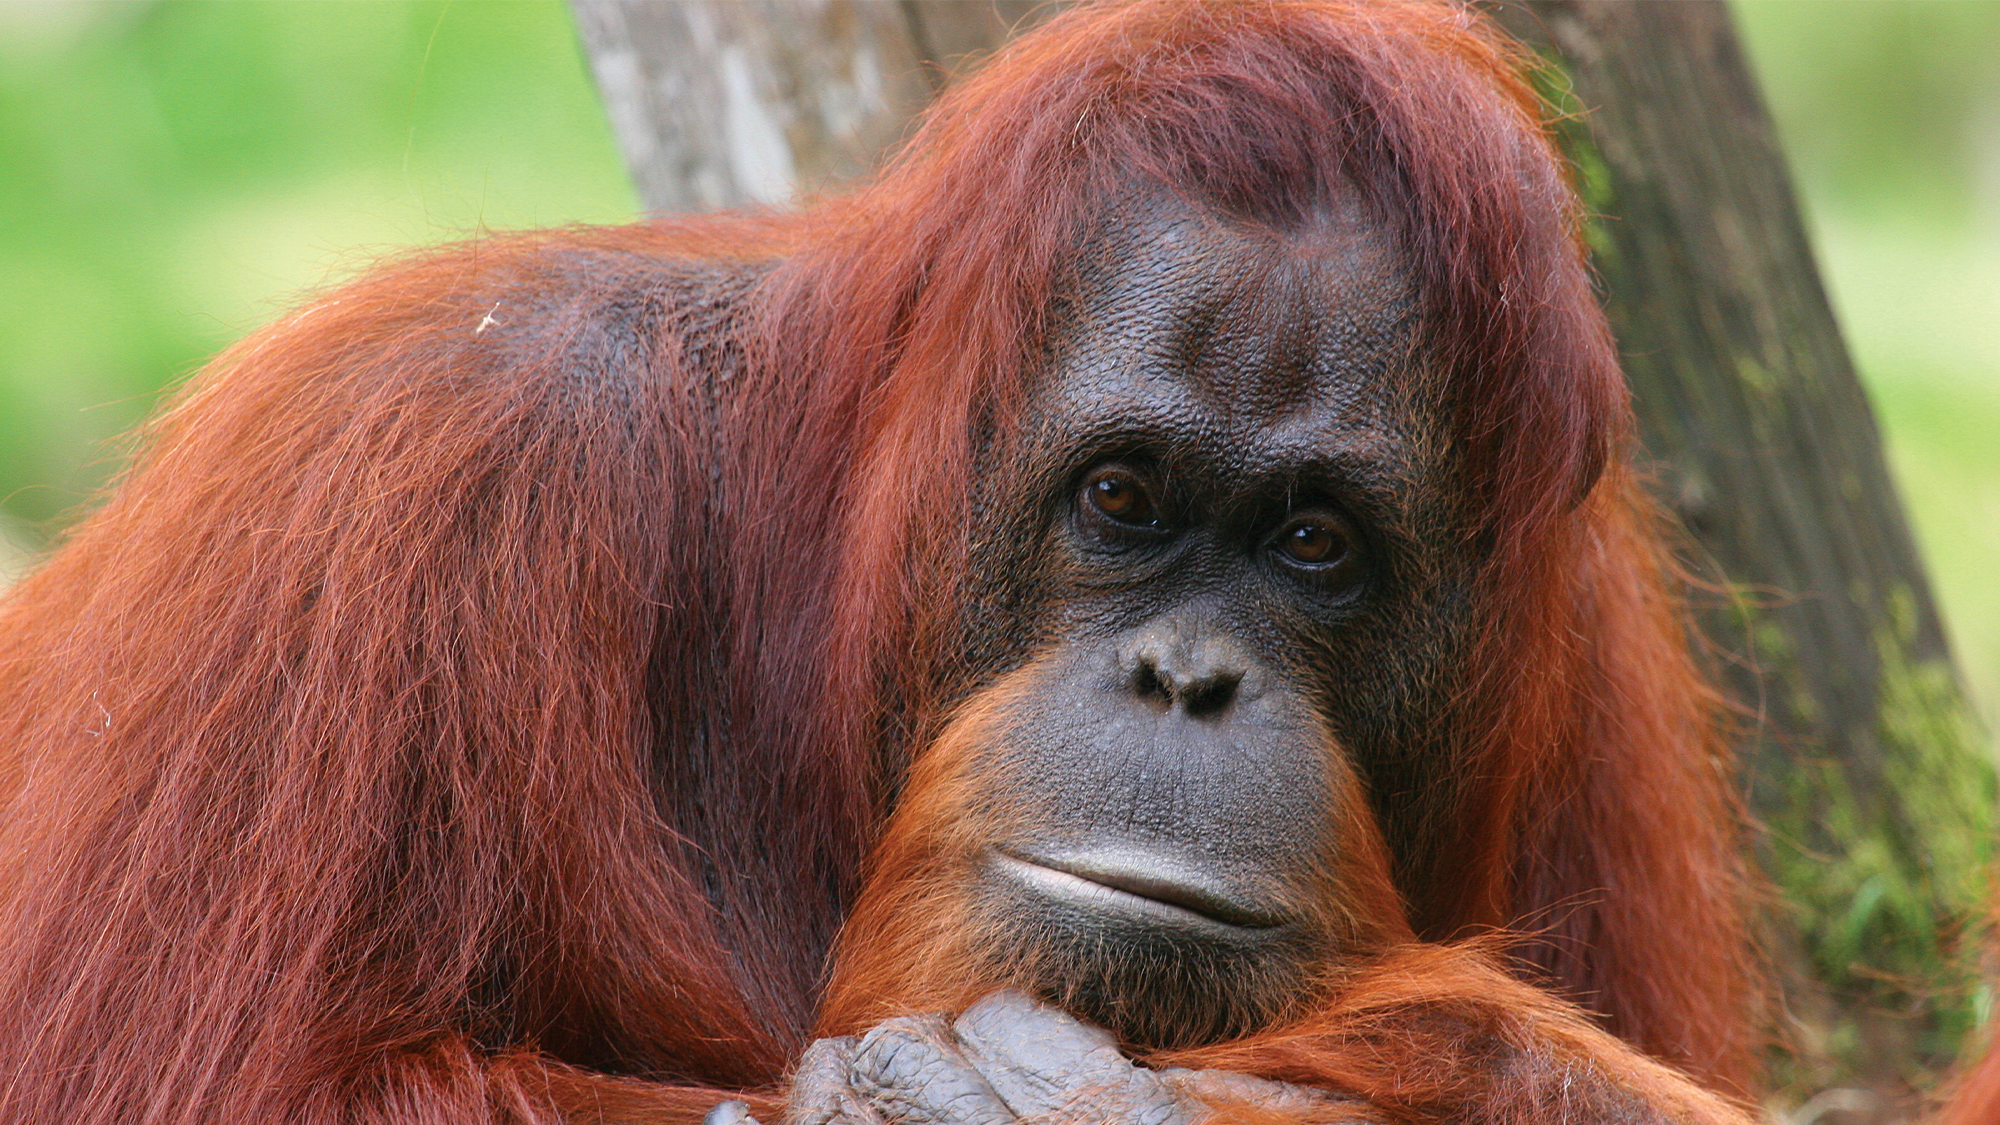 Orangutans can make two sounds at the same time